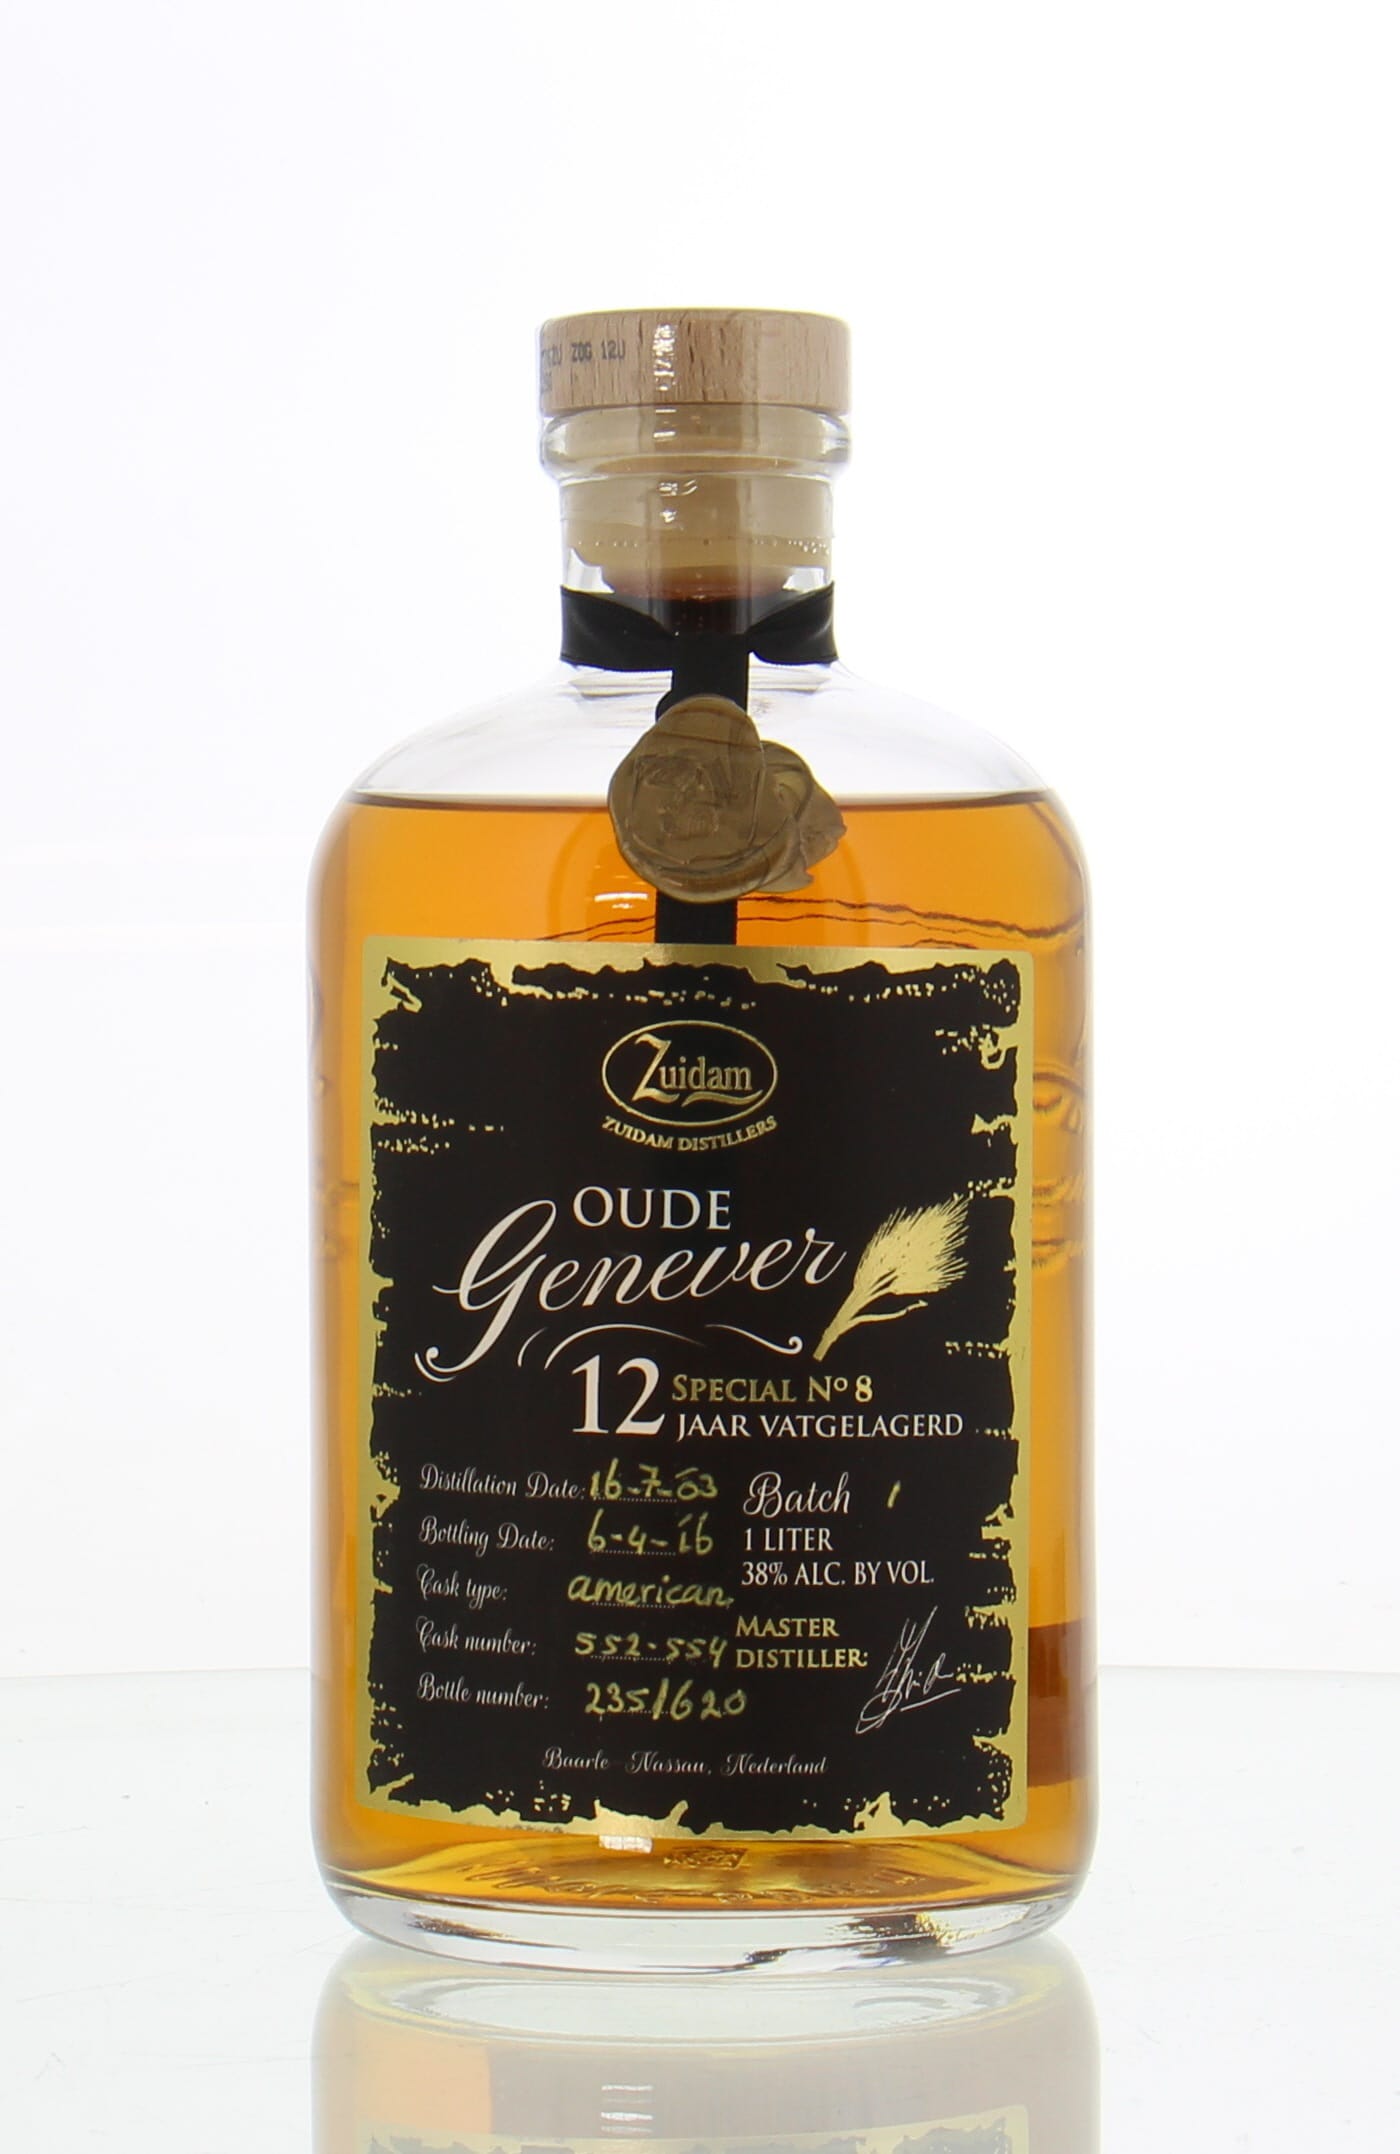 Zuidam - Oude Genever 12 Years Old Special Nº 8 cask 552-554 38% NV